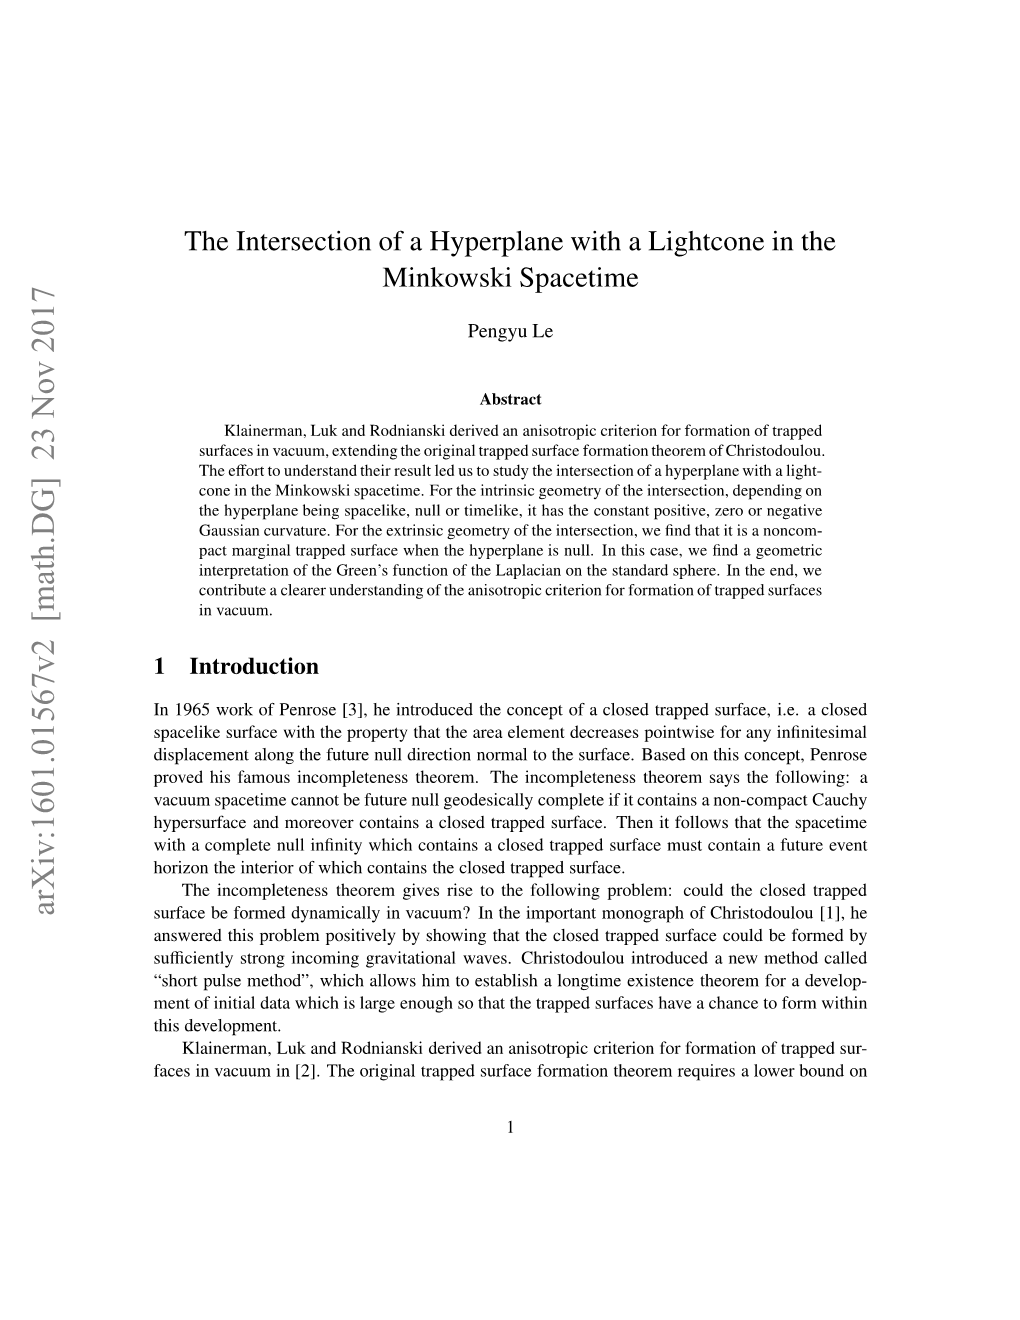 The Intersection of a Hyperplane with a Lightcone in the Minkowski